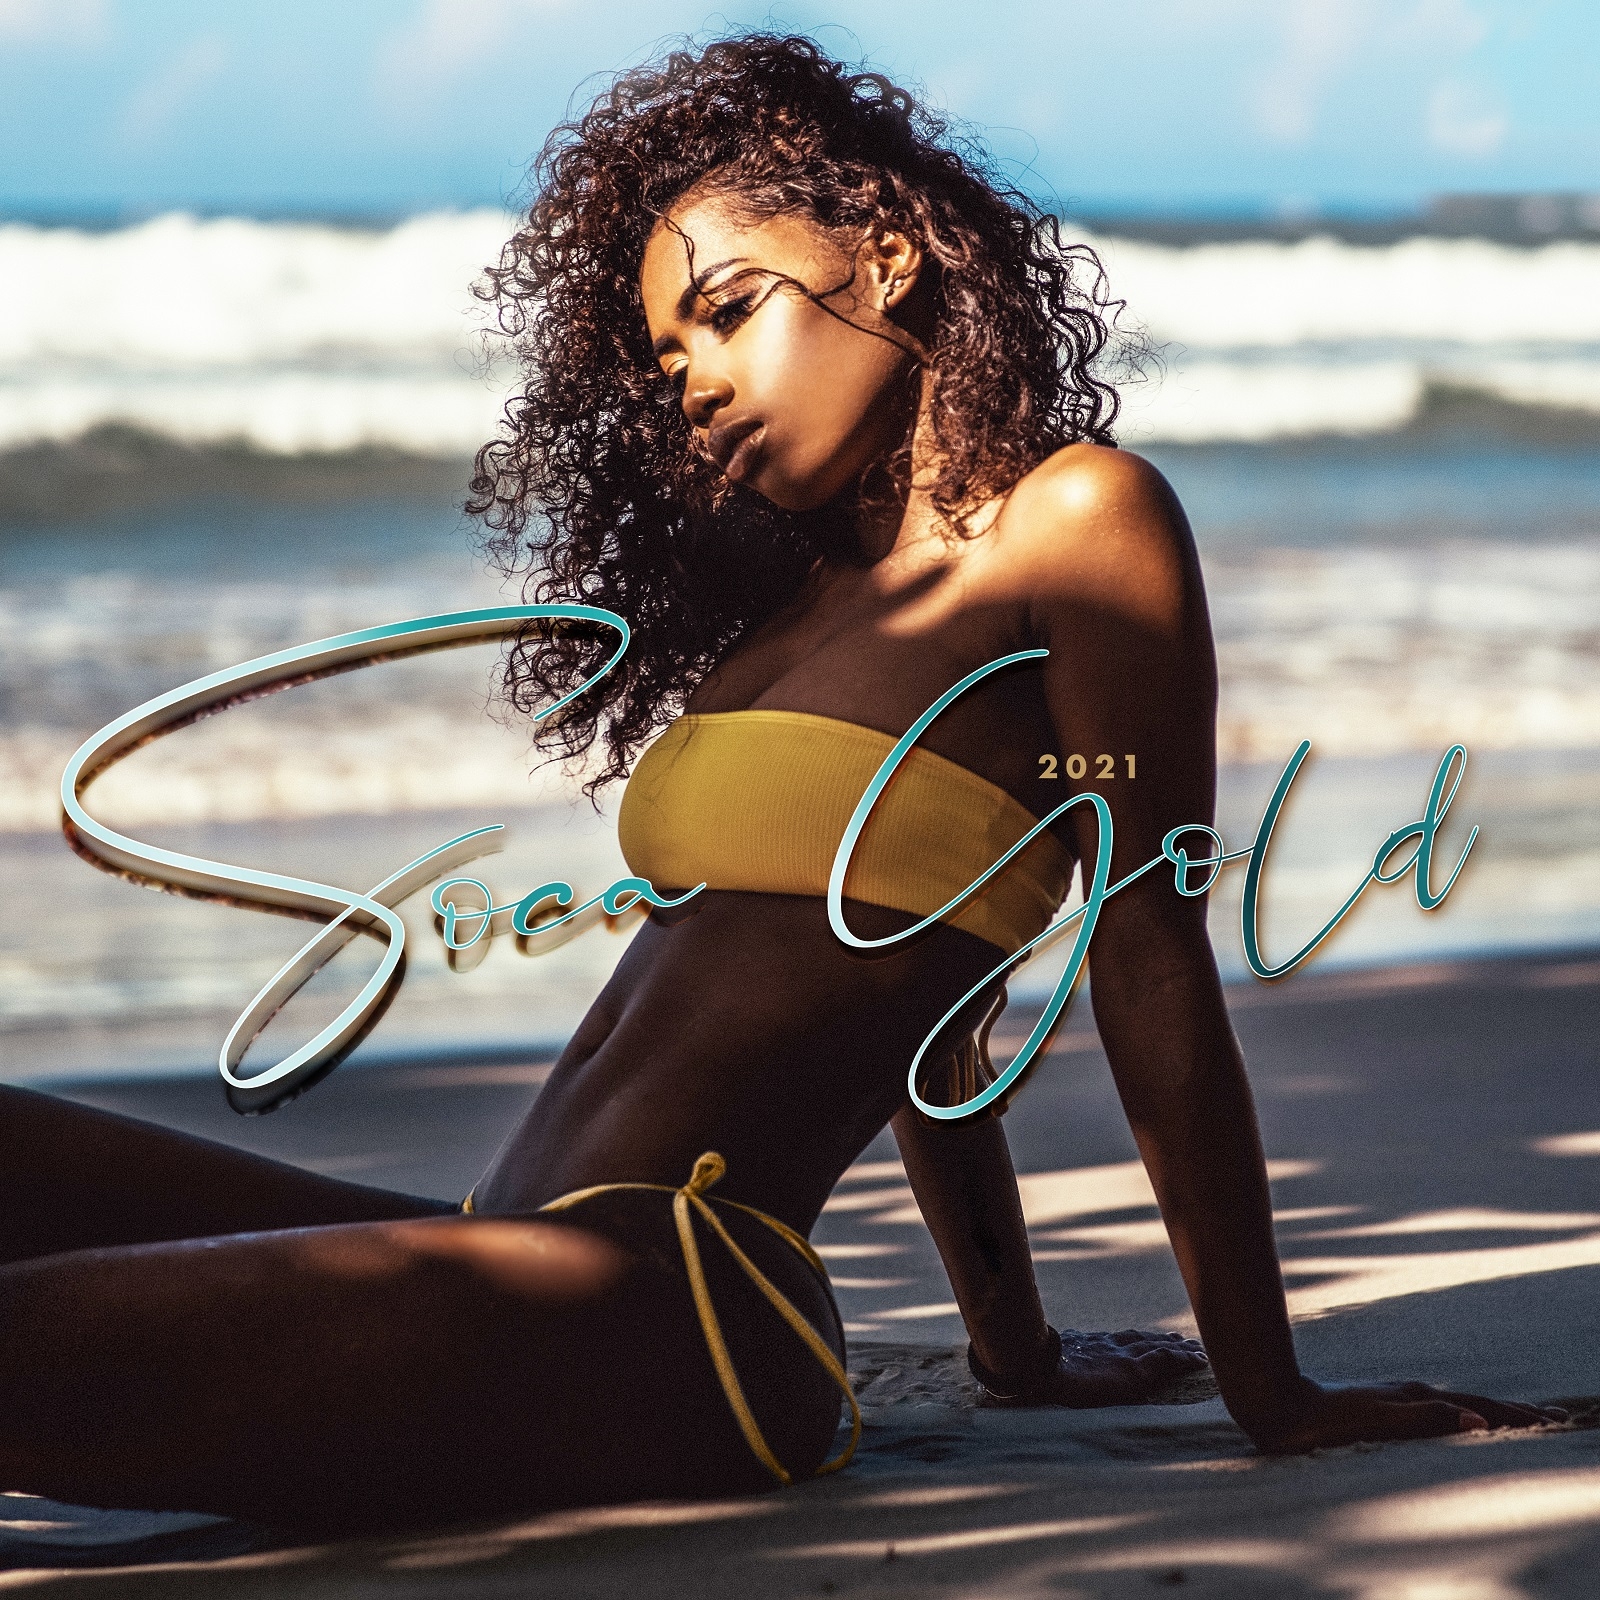 Soca Gold 2021 - Soca Gold 2021 is Here - Download Today! - Artwork